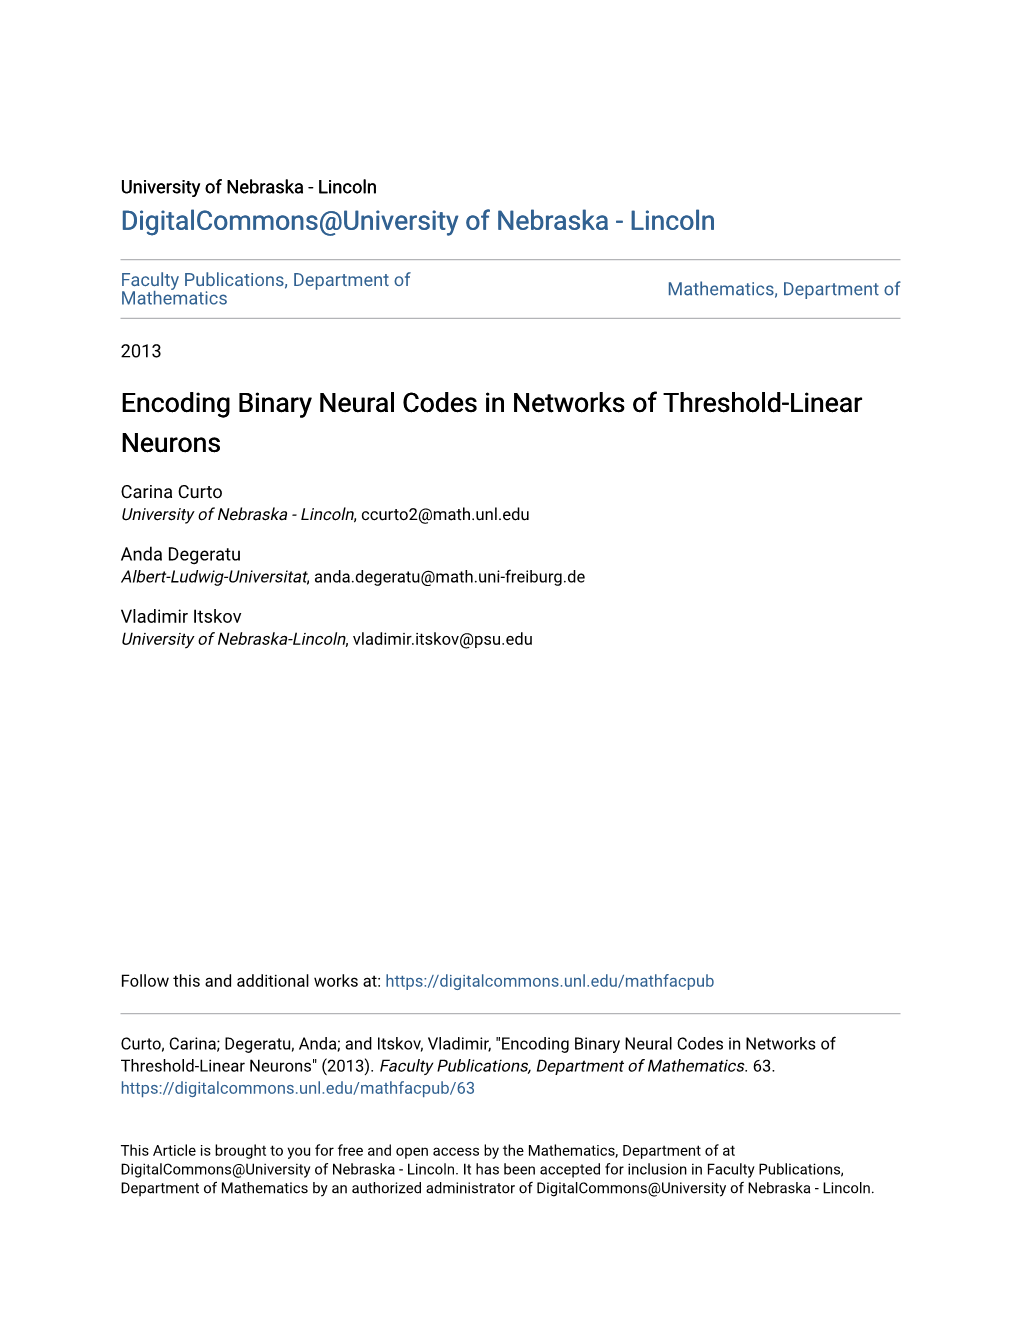 Encoding Binary Neural Codes in Networks of Threshold-Linear Neurons